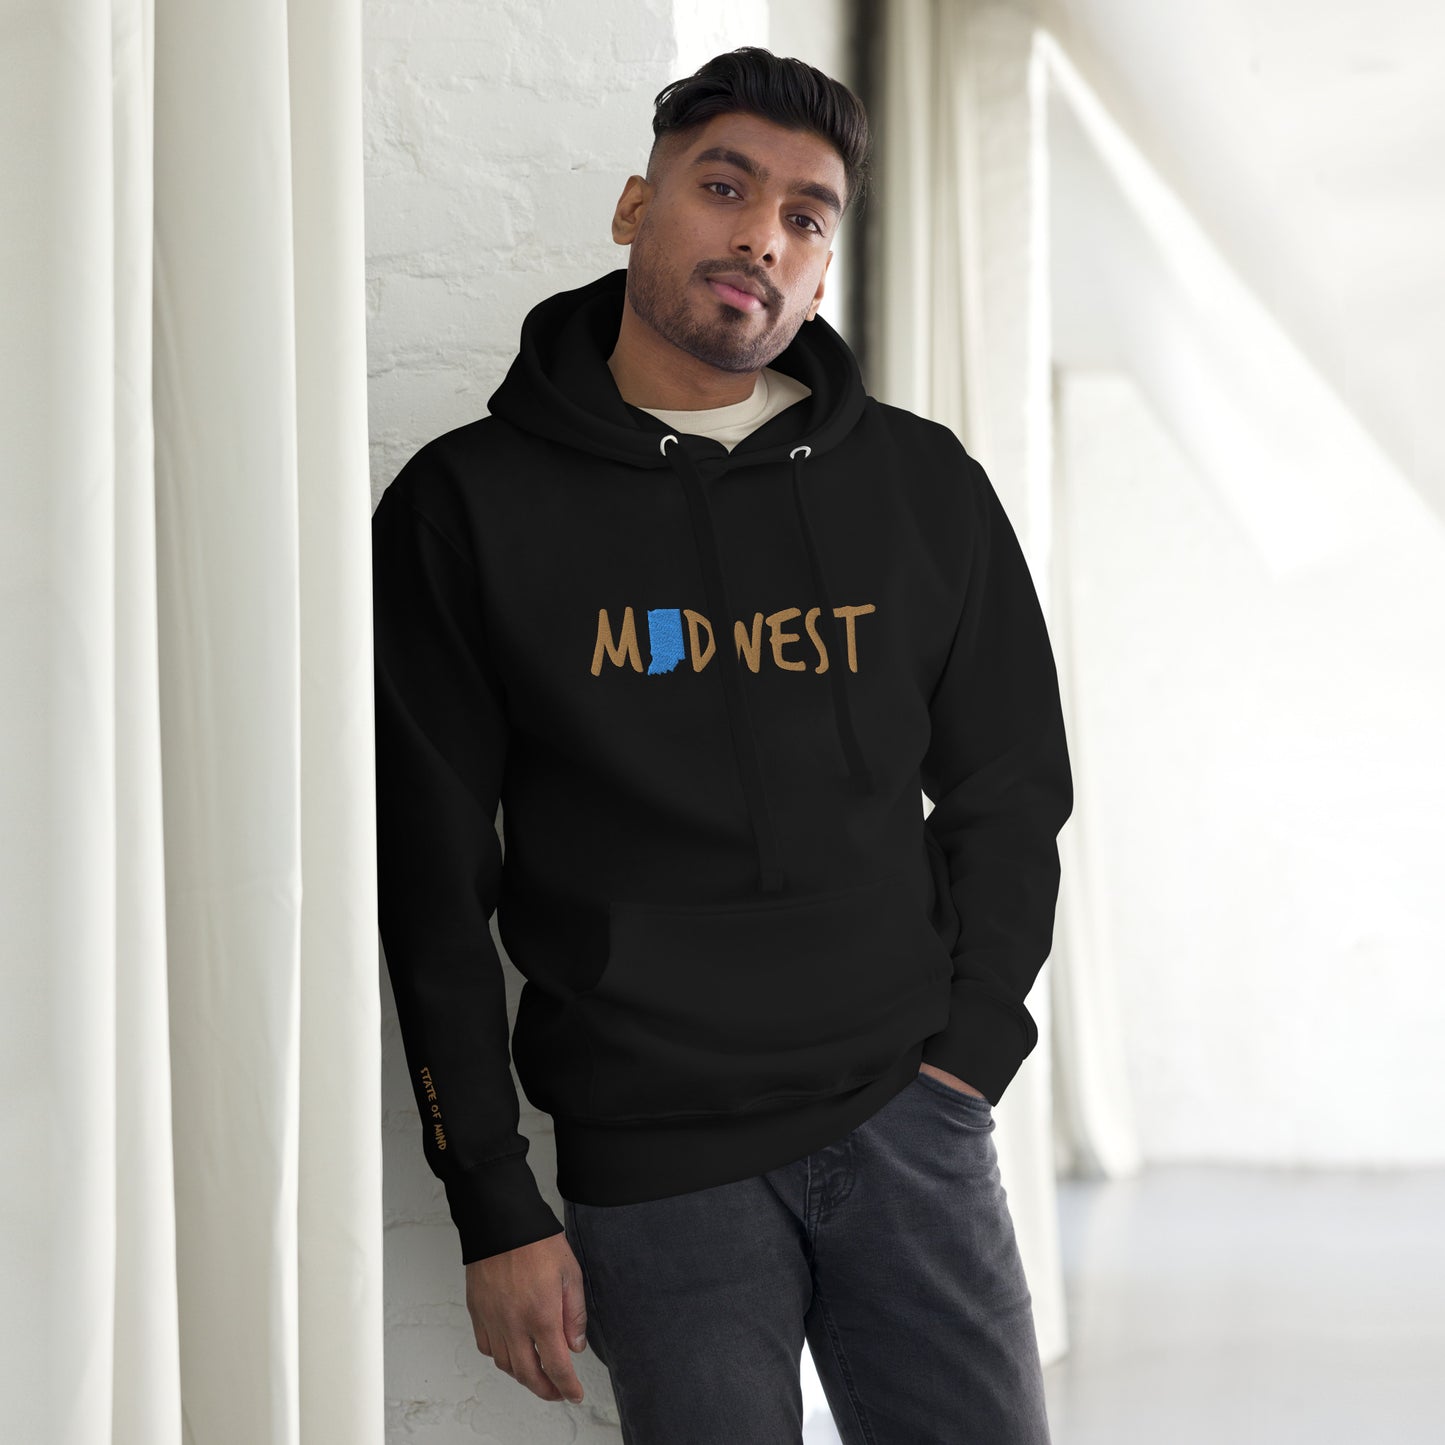 Indiana Midwest 'Love This' Embroidered Unisex Hoodie Unisex Hoodie